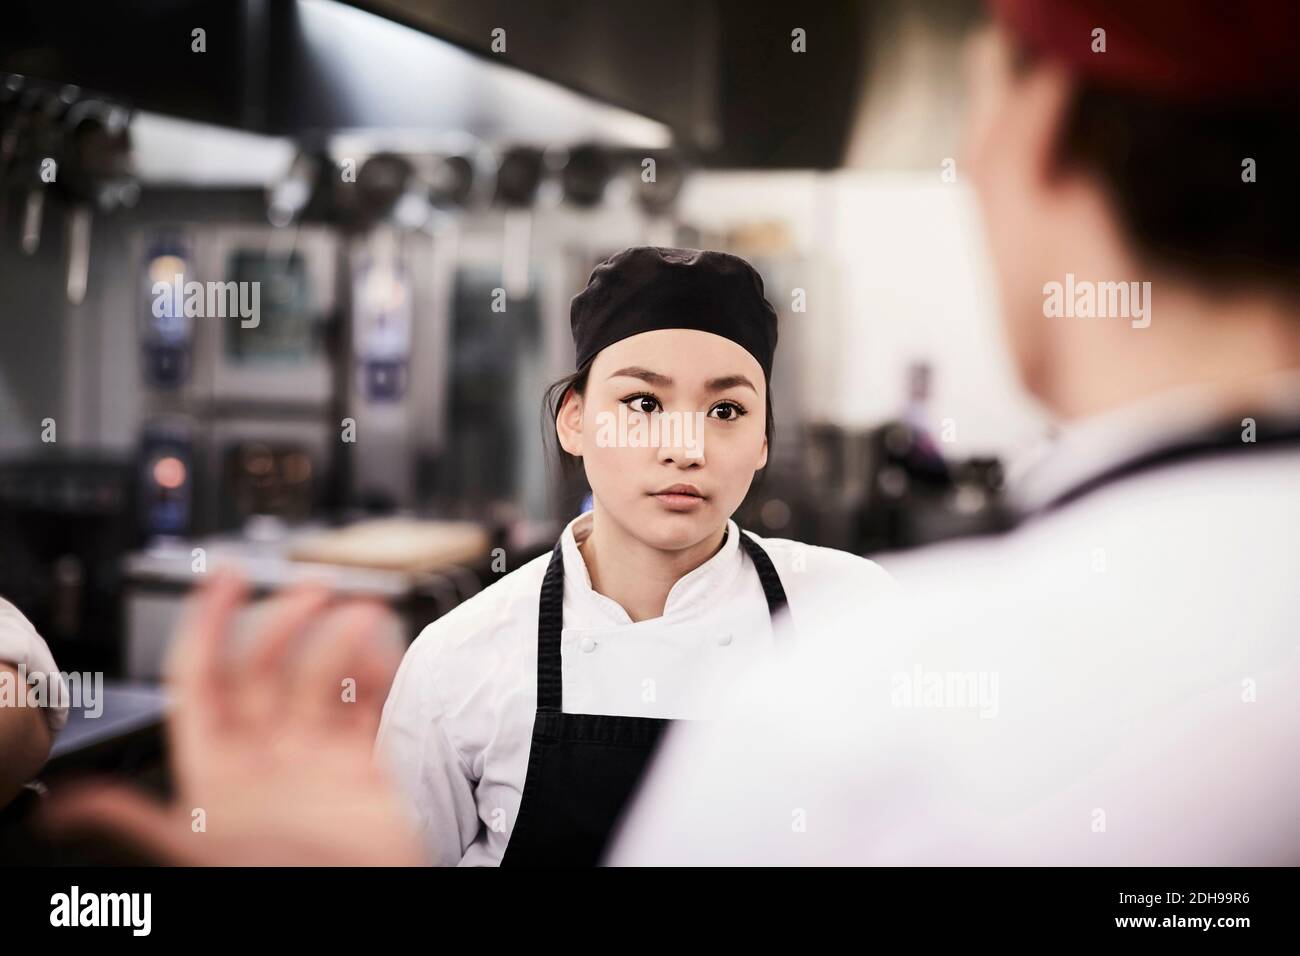 Female chef student listening to teacher in cooking school Stock Photo